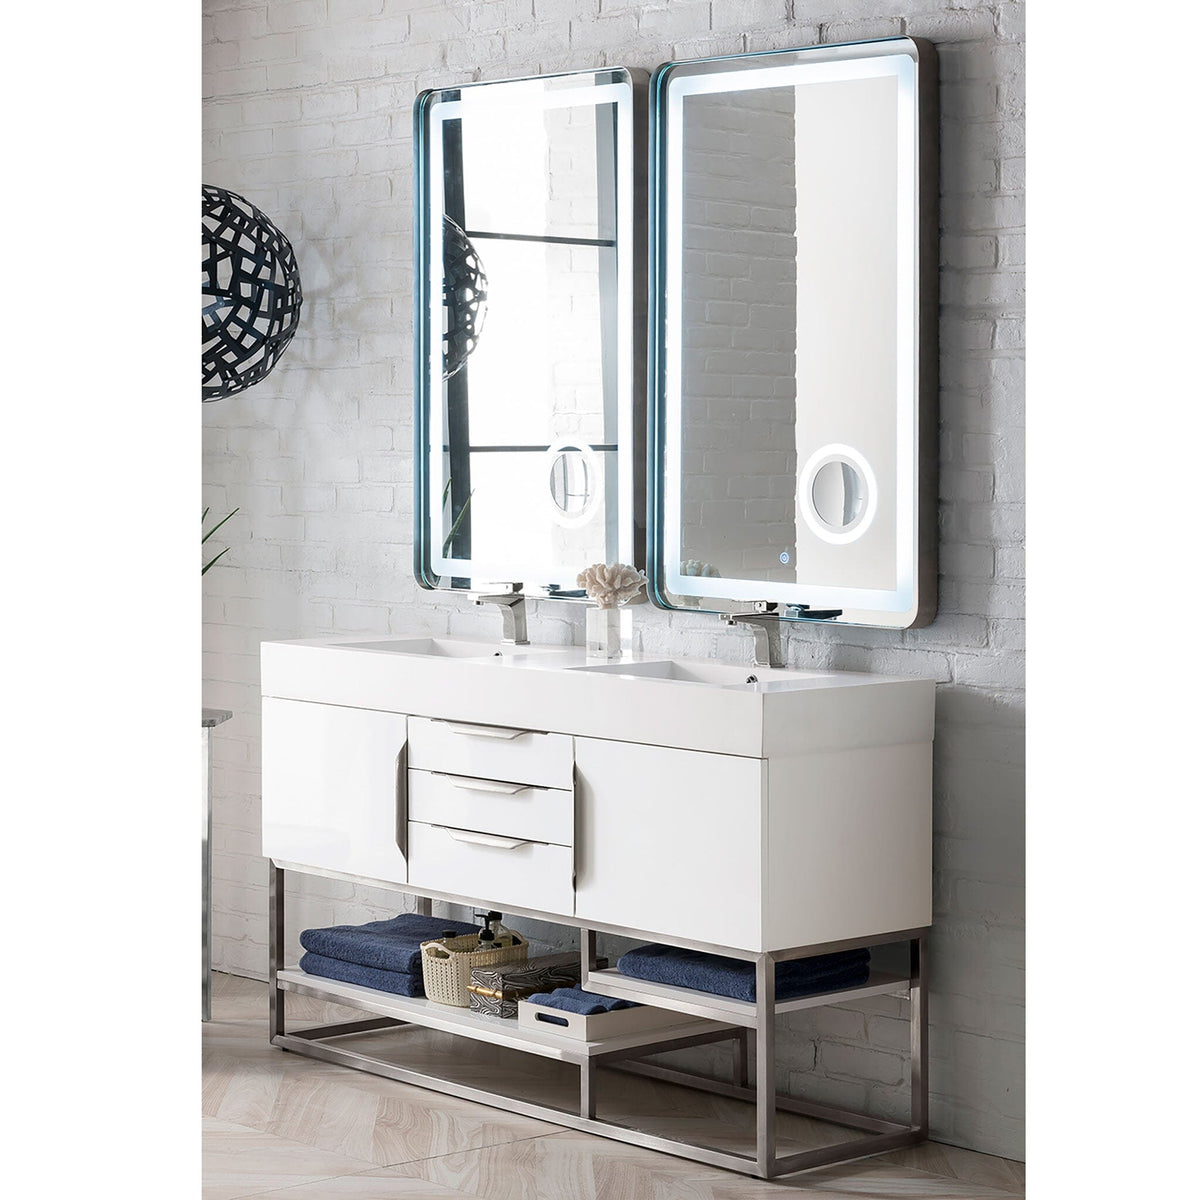 59" Columbia Double Bathroom Vanity, Glossy White w/ Brushed Nickel Base and Glossy White Composite Stone Top